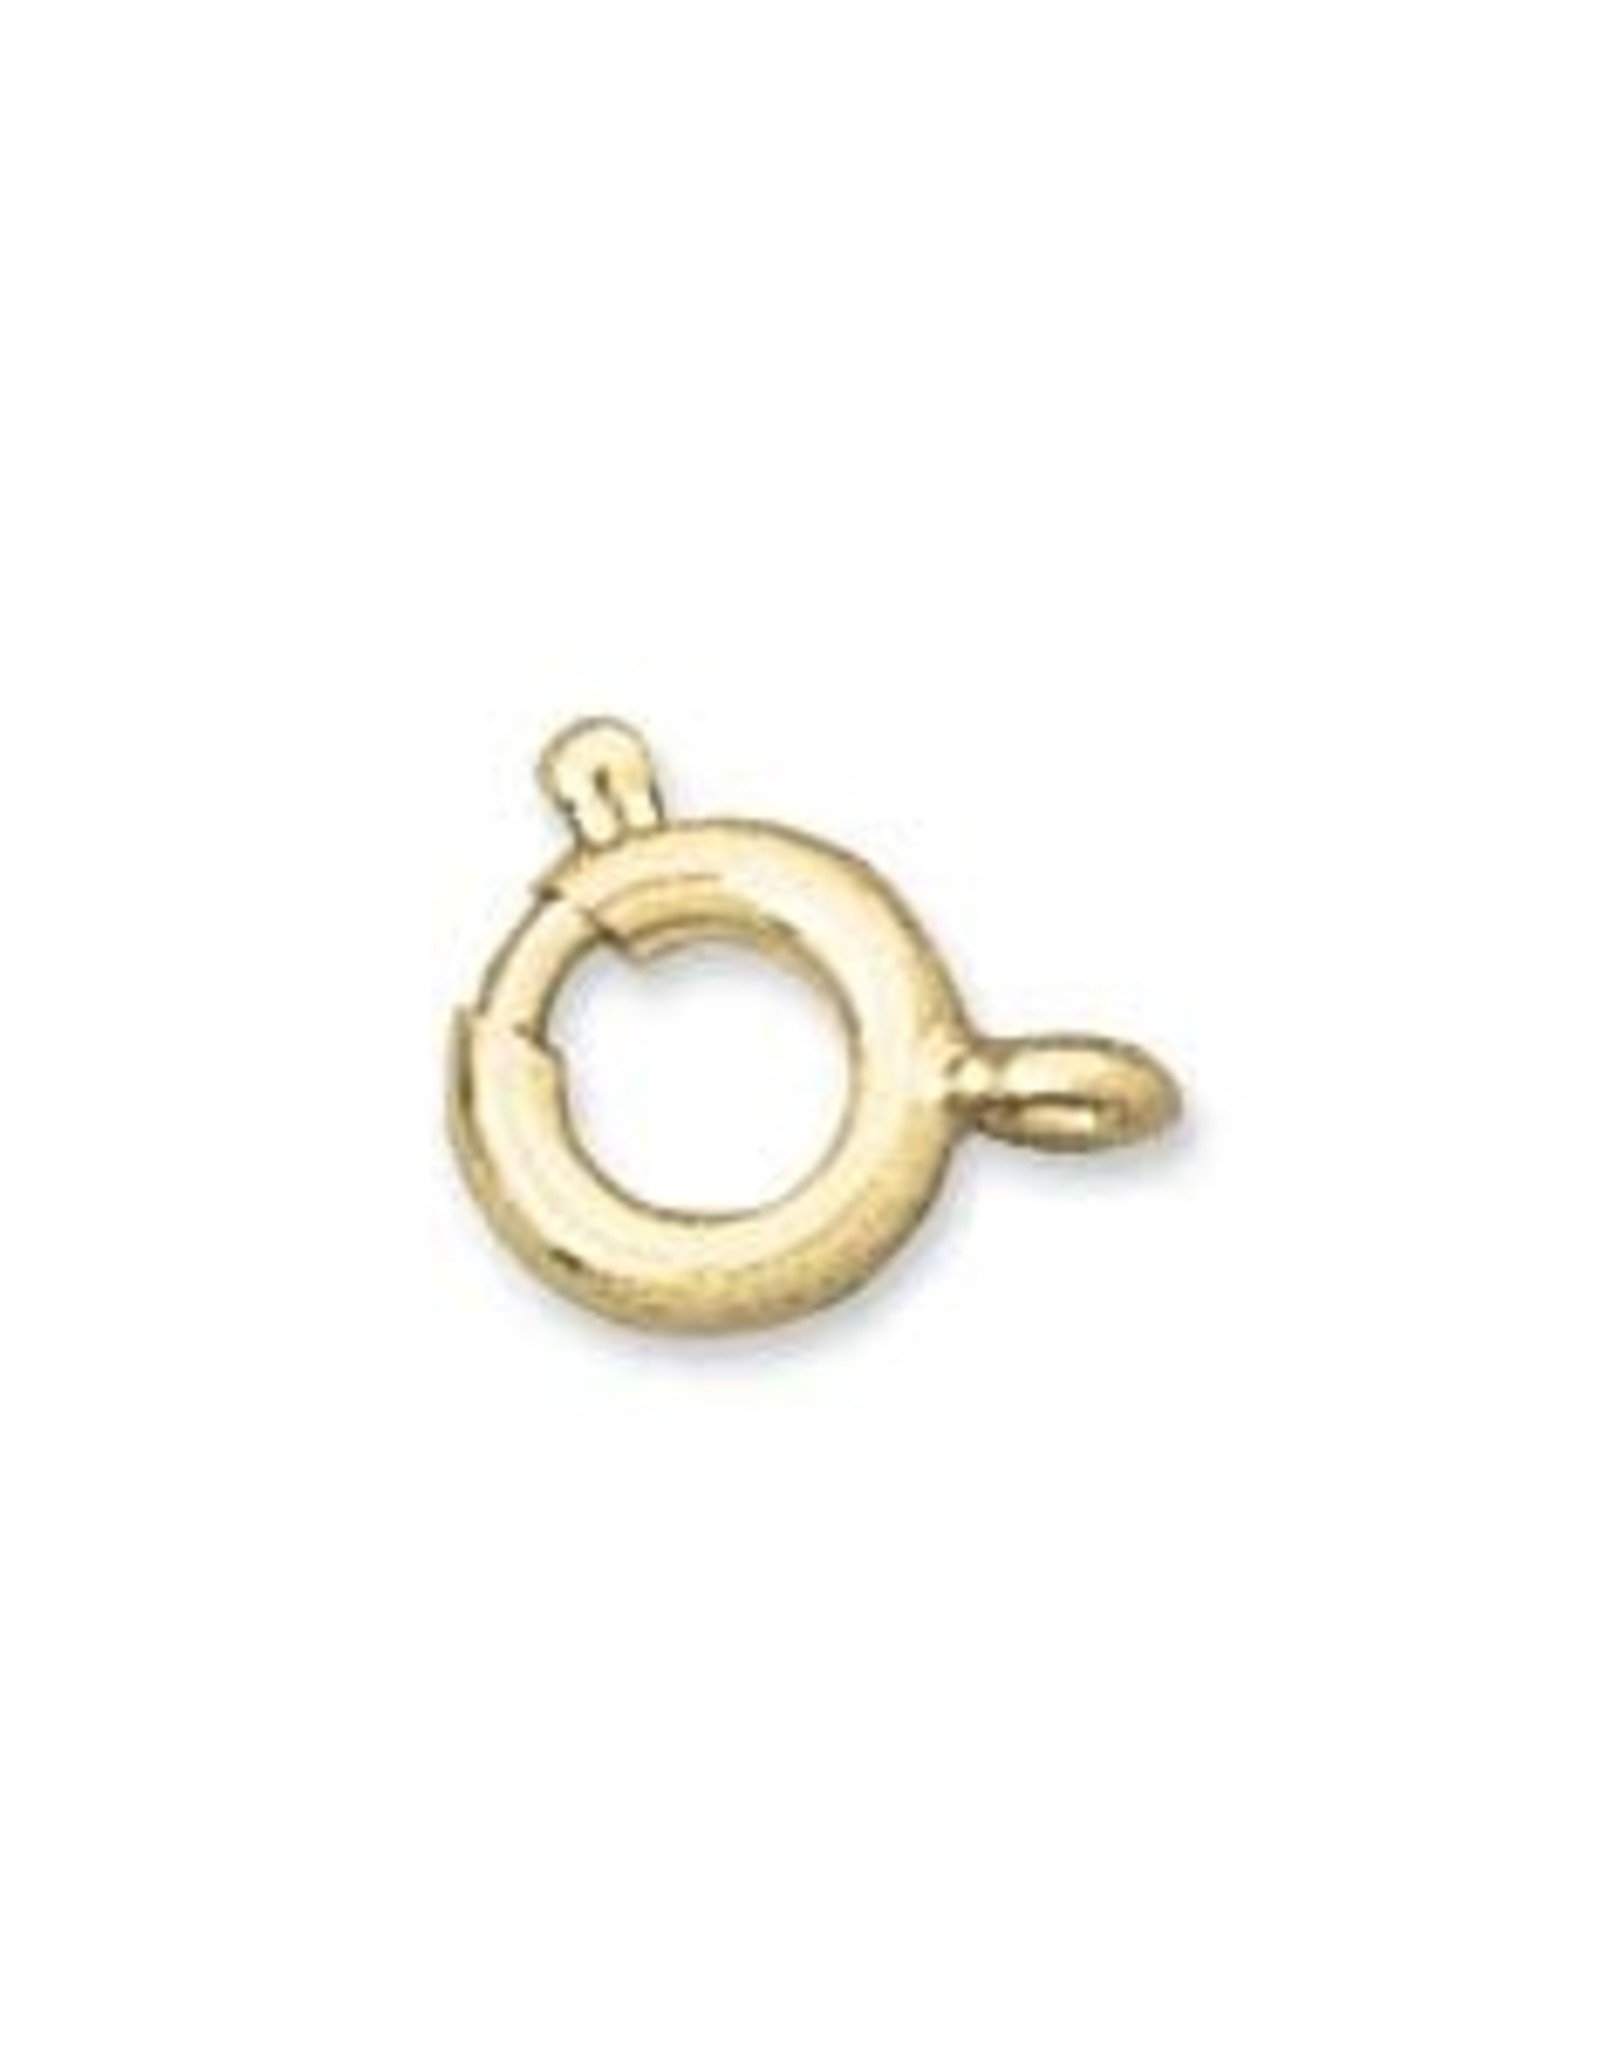 6mm Spring Ring Clasp, Gold Plated Qty 12